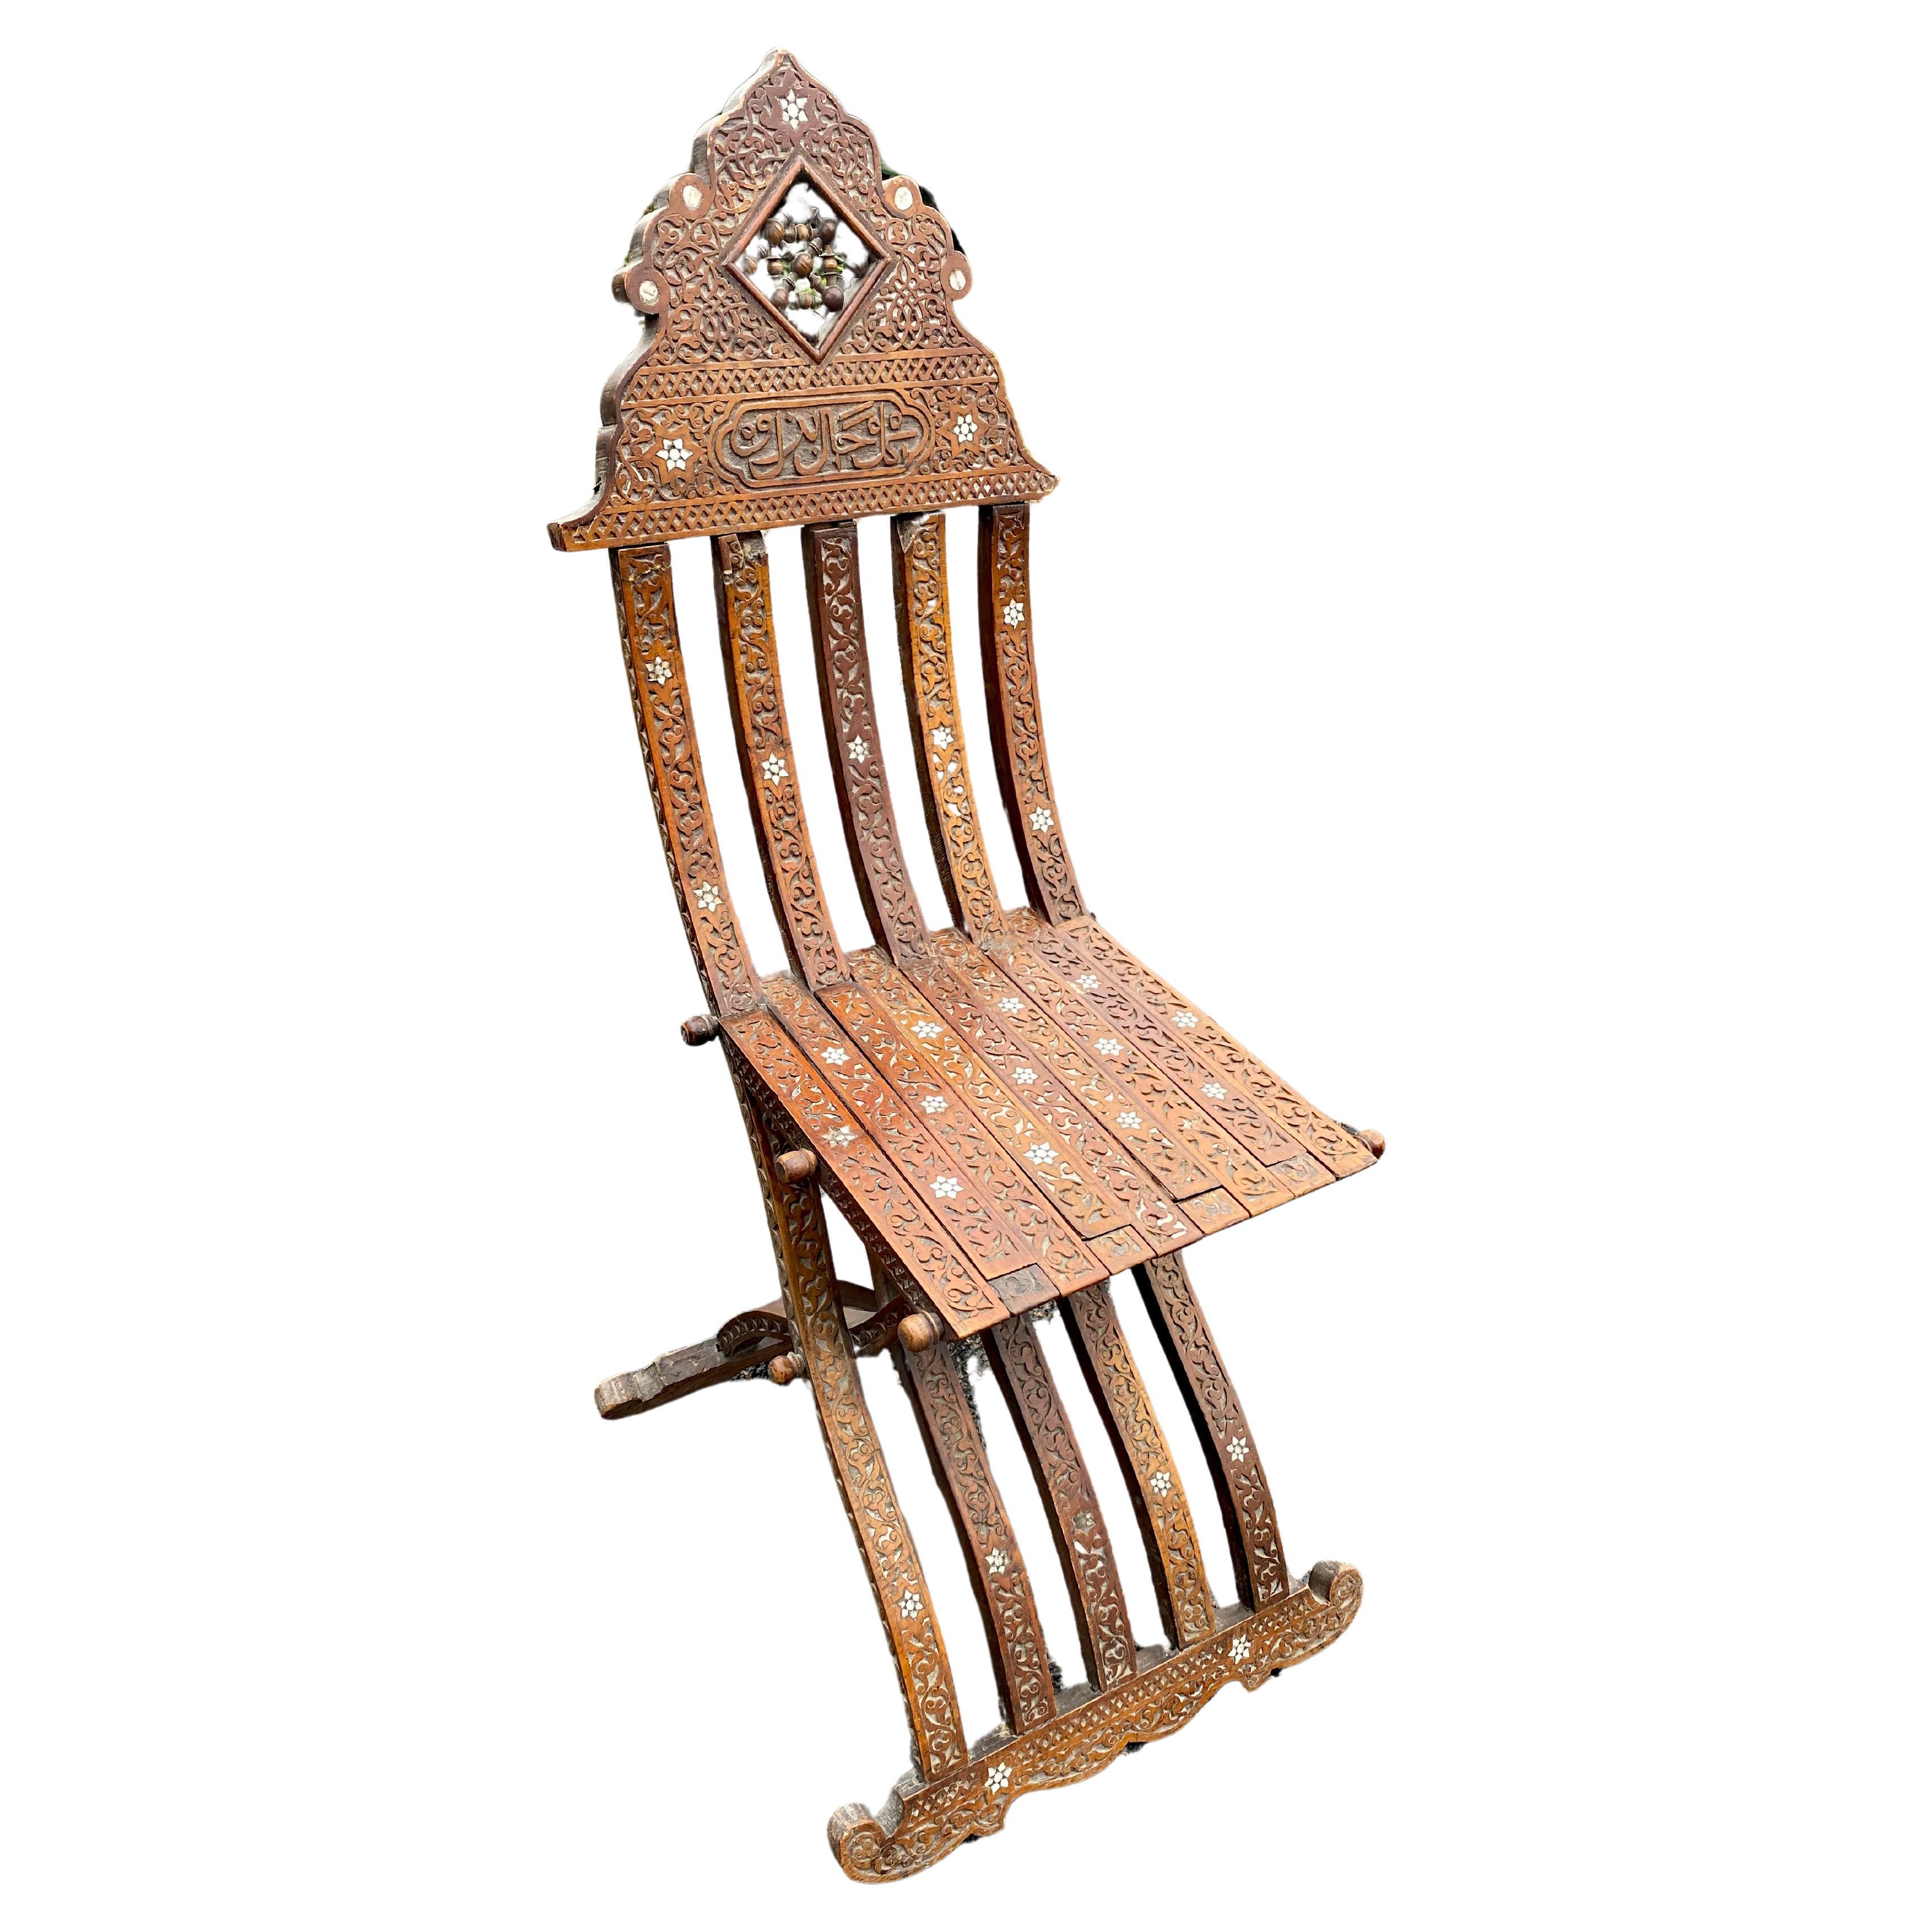 Antique 19th century Oriental work, folding chair in carved wood, bone inlay, circa 1880